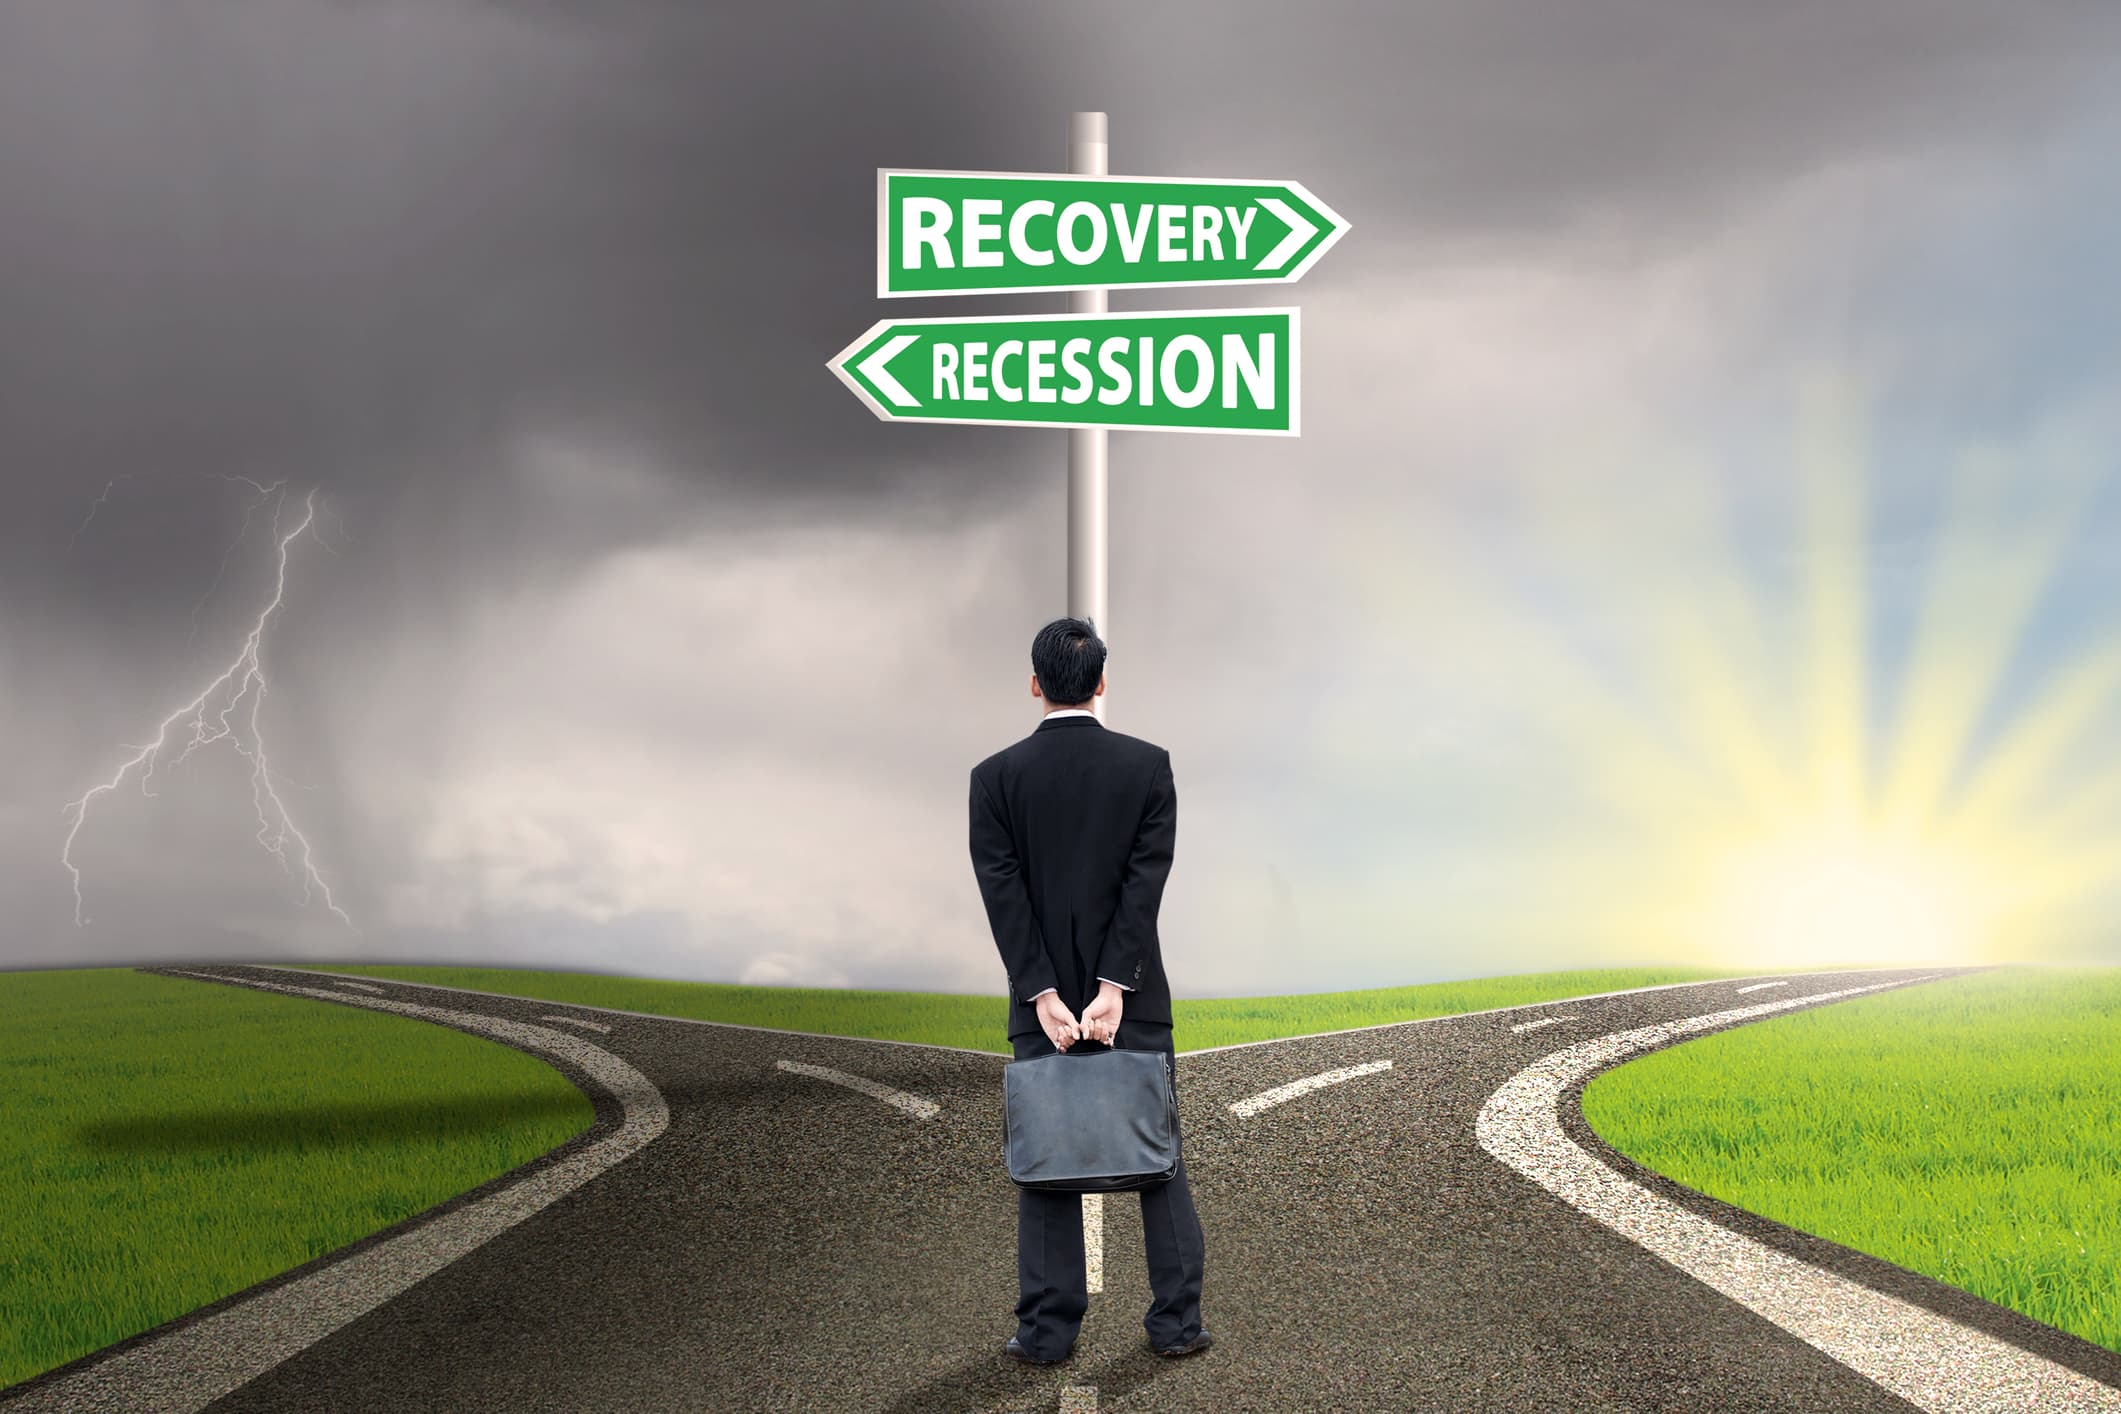 Recovery-Recession